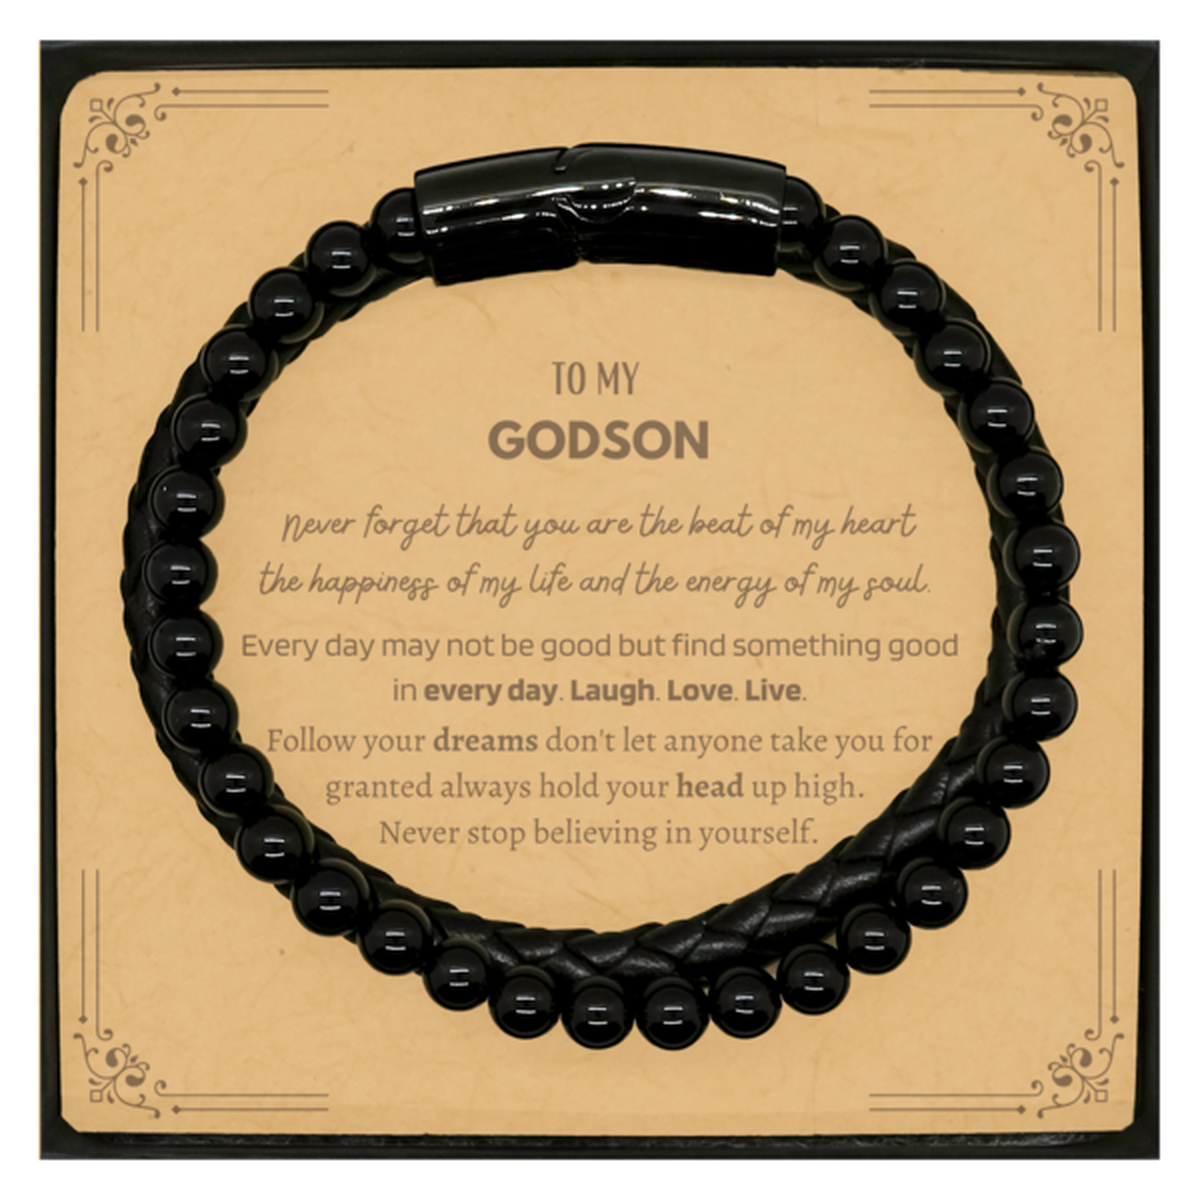 To My Godson Message Card Gifts, Christmas Godson Stone Leather Bracelets Present, Birthday Unique Motivational For Godson, To My Godson Never forget that you are the beat of my heart the happiness of my life and the energy of my soul